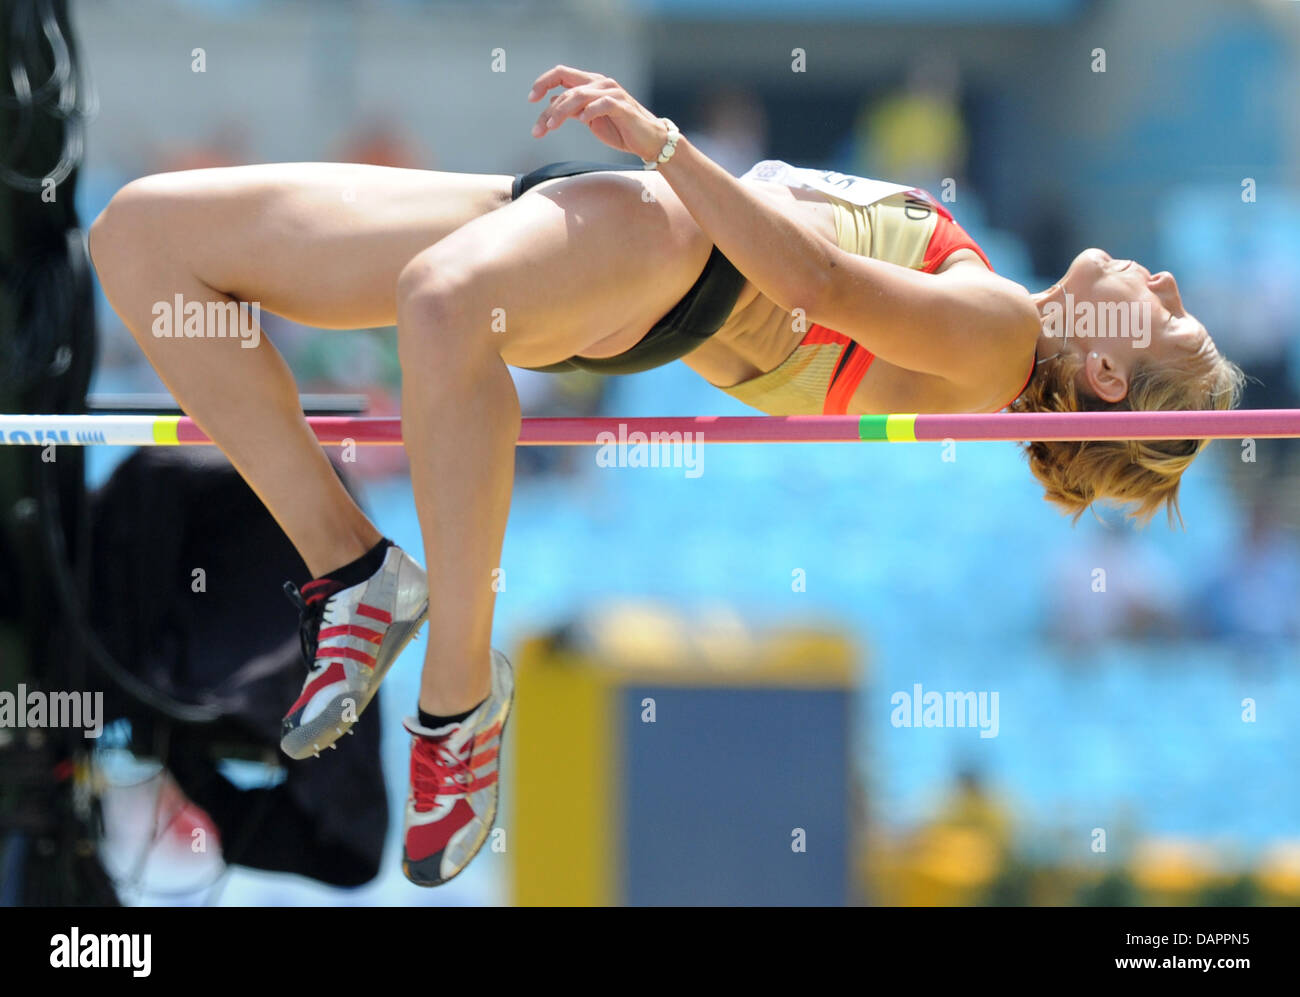 Jennifer Oeser of Germany competes in High Jump event of the Heptathlon competition at the 13th IAAF World Championships in Athletics, in Daegu, Republic of Korea, 29 August 2011. Photo: Rainer Jensen dpa  +++(c) dpa - Bildfunk+++ Stock Photo